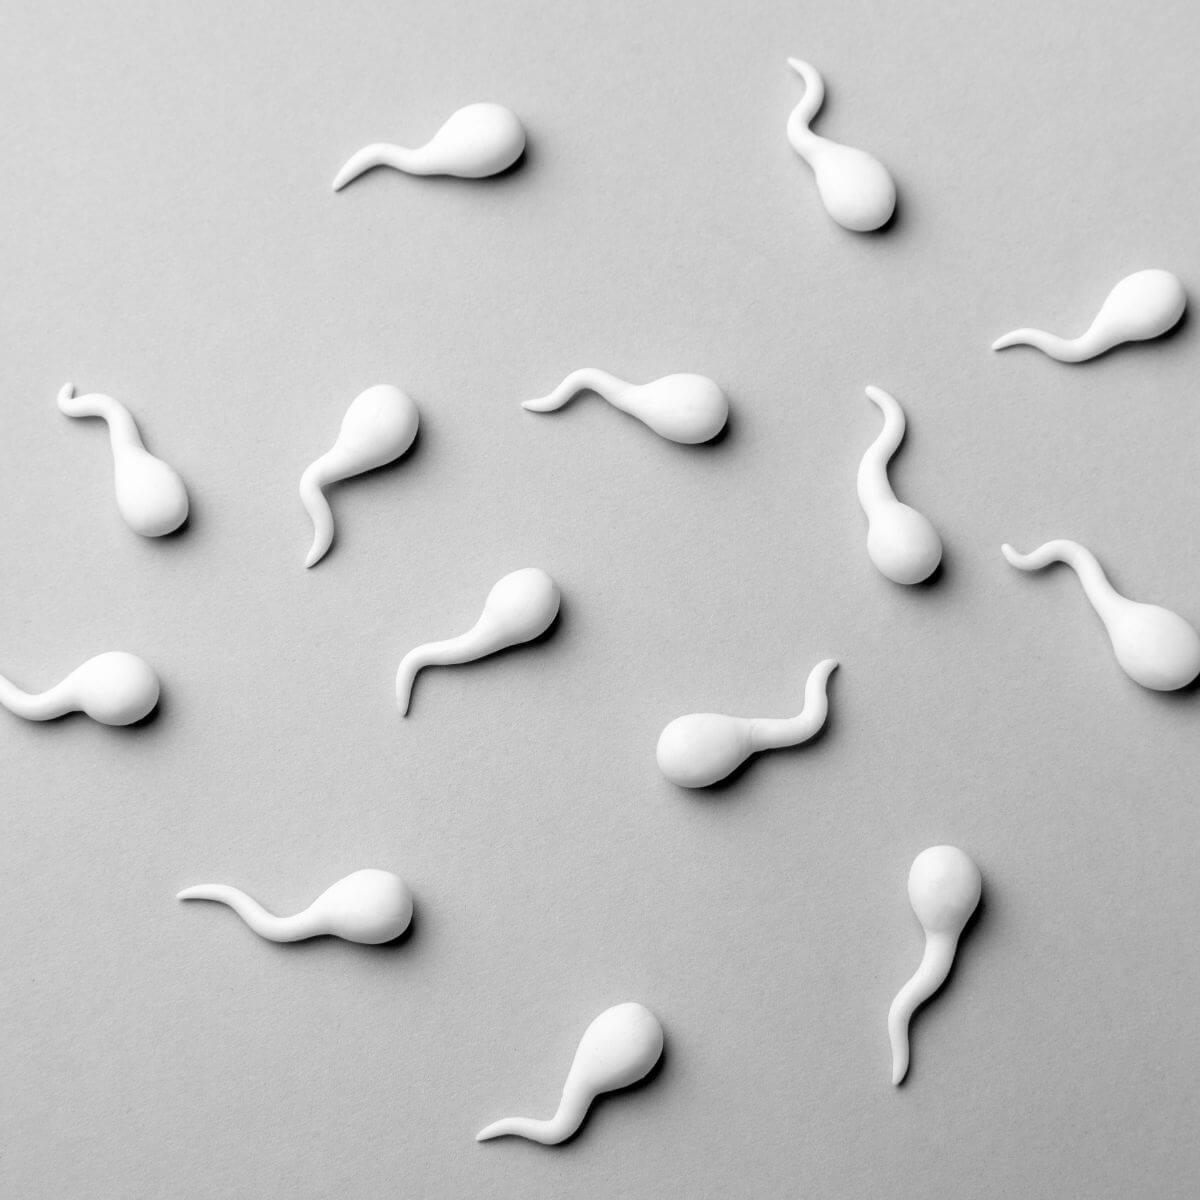 14 little white sperm swimming on a gray background